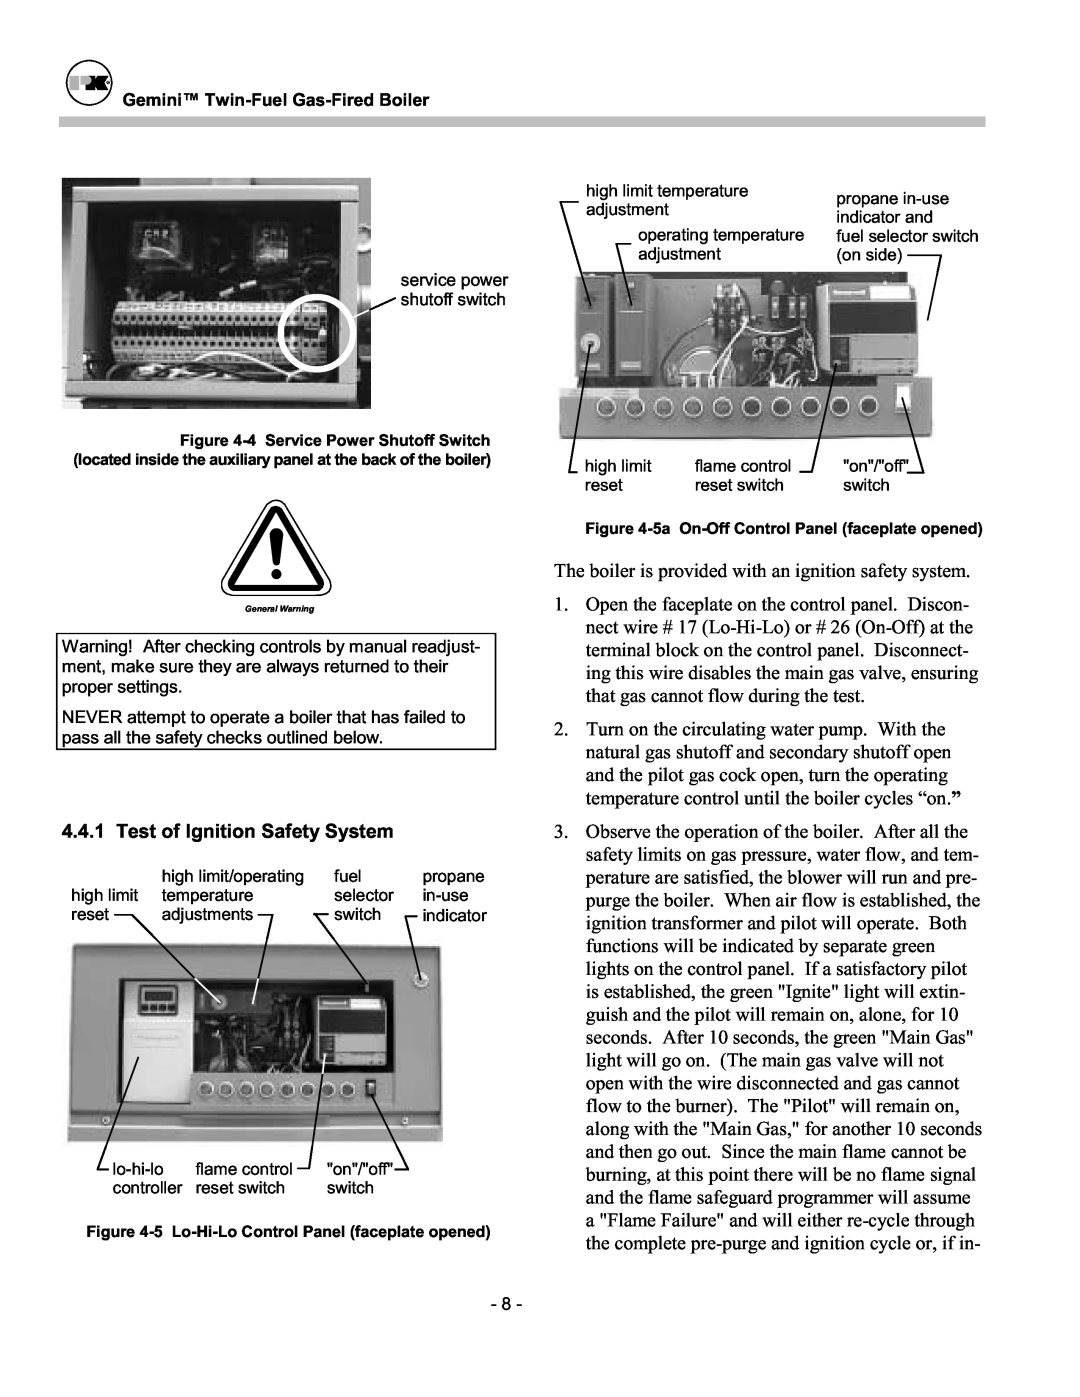 Patterson-Kelley TBIG-03 owner manual Test of Ignition Safety System 